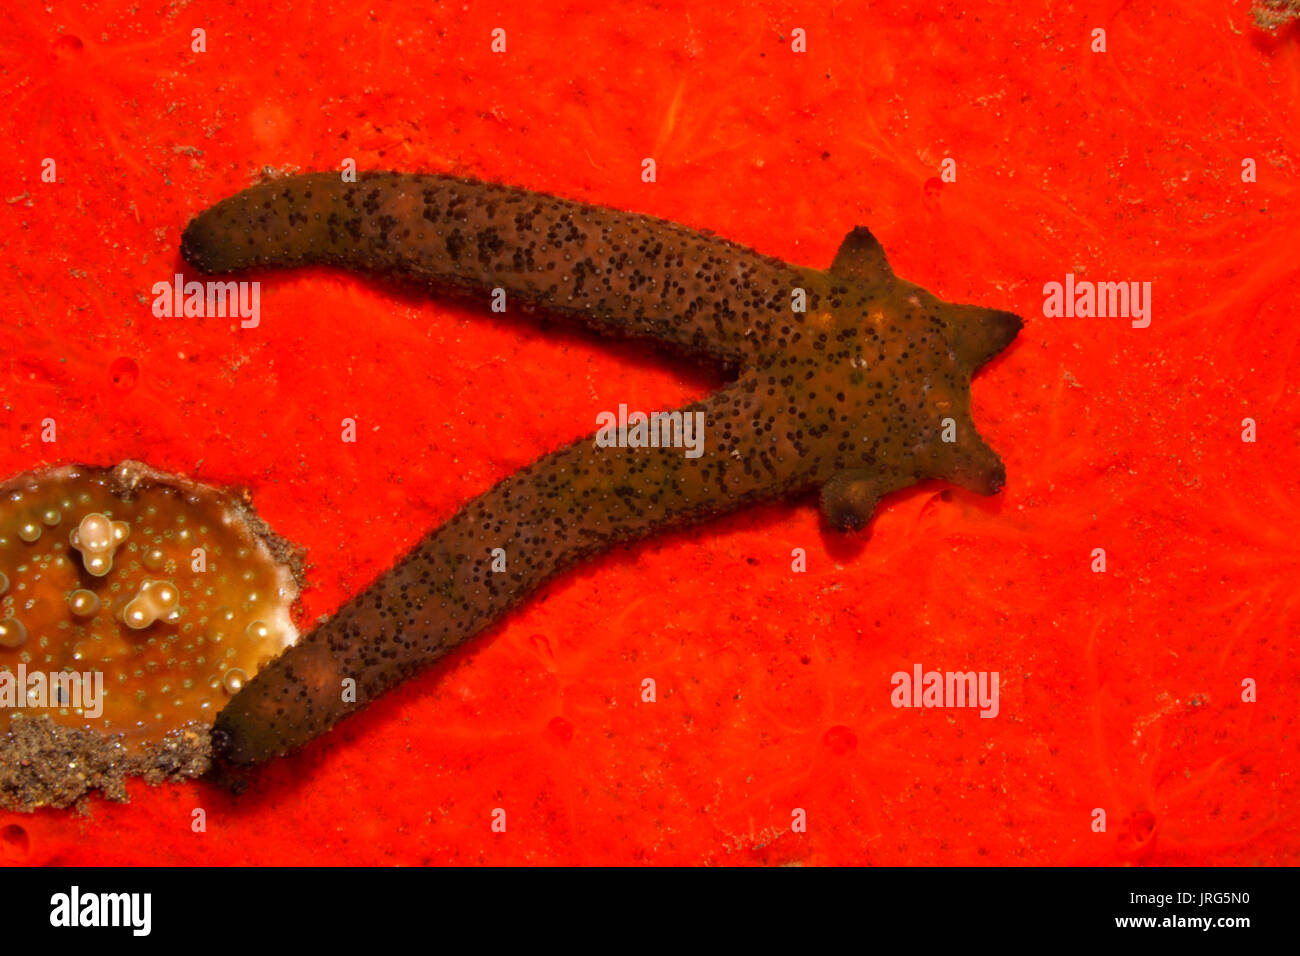 Regenerating Luzon Sea Star Echinaster luzonicus, showing four arm regeneration growing from two  'parent' arms. Please see below for more information Stock Photo